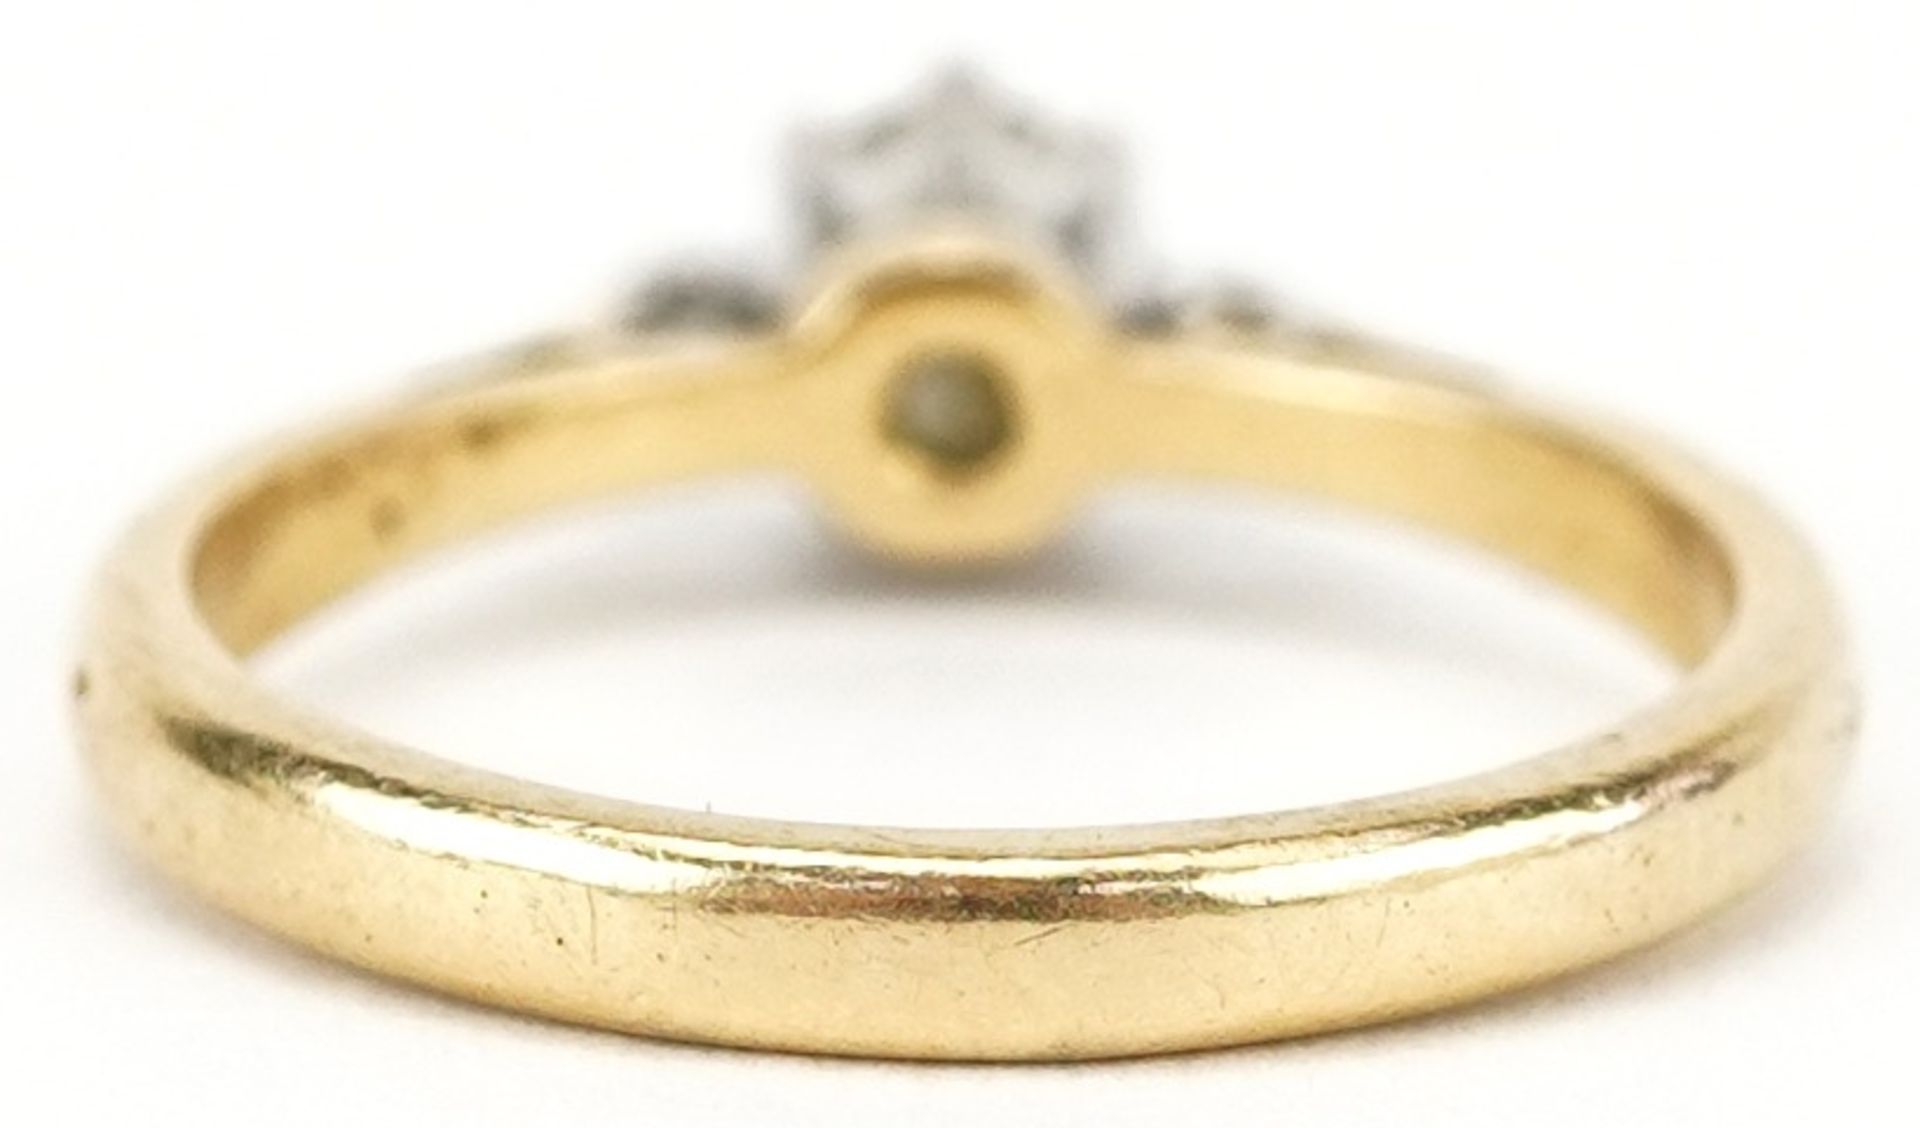 18ct gold diamond solitaire ring, the diamond approximately 0.30 carat, size J, 2.6g - Image 2 of 4